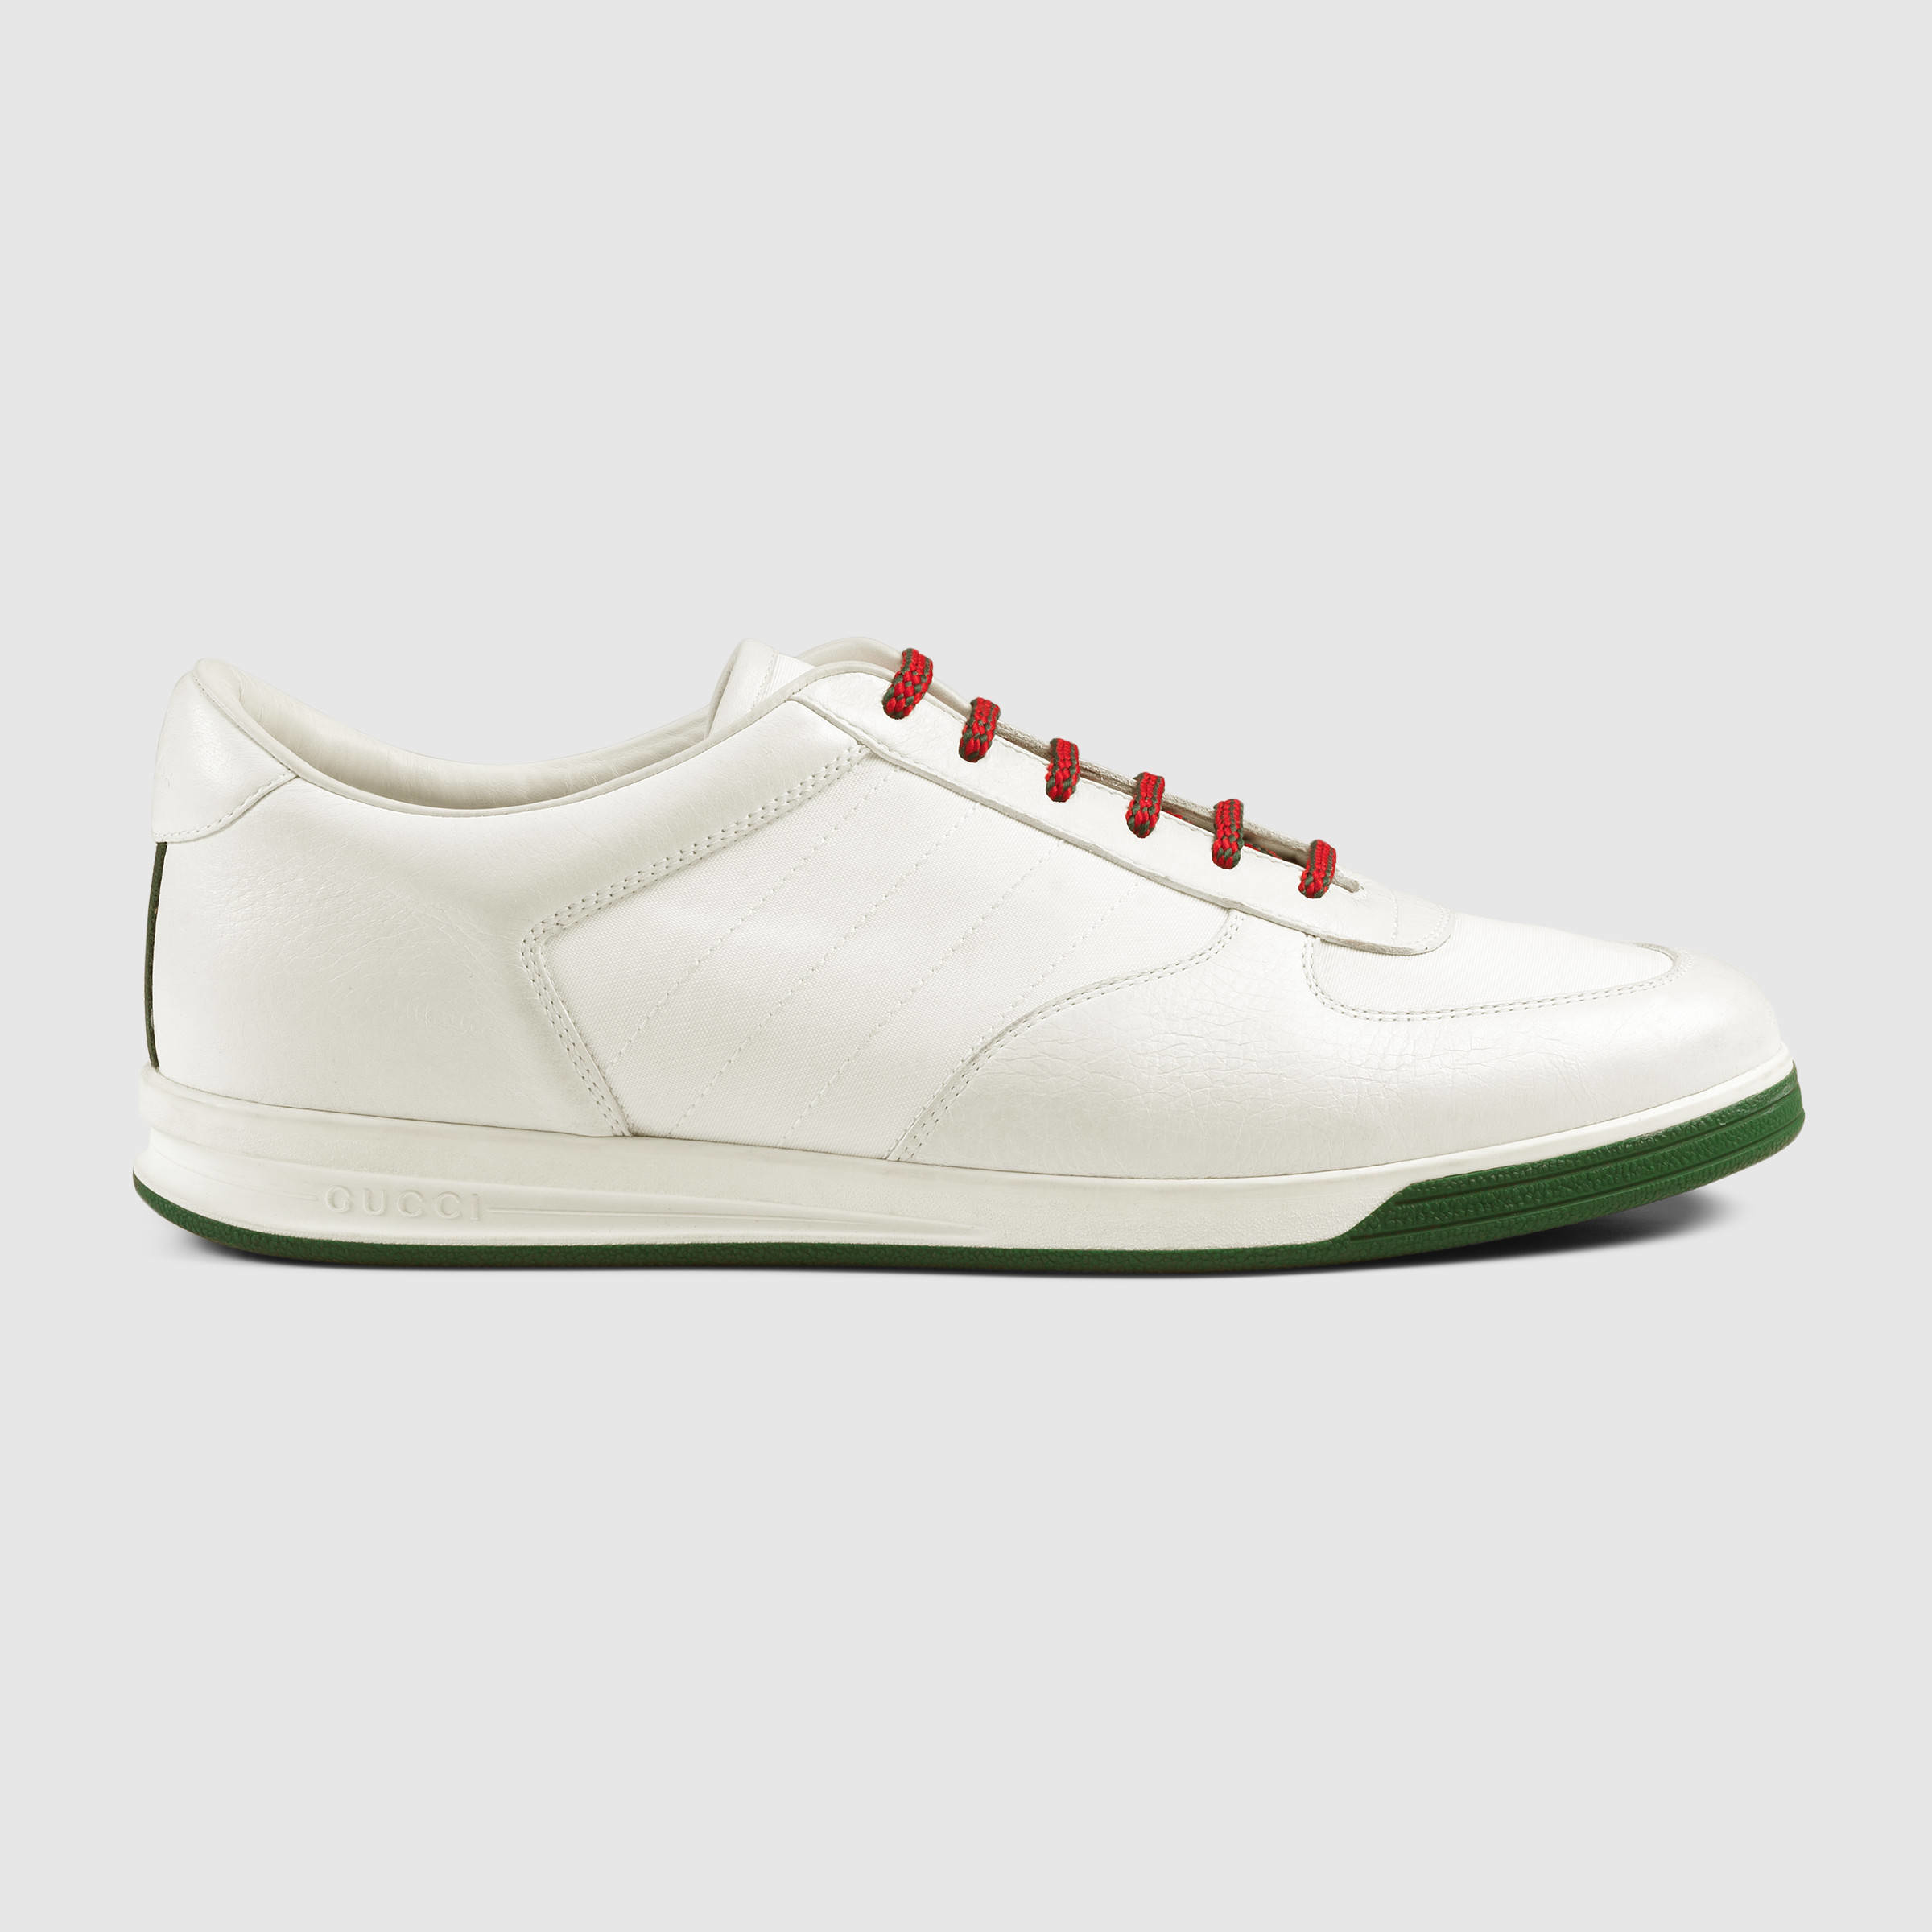  Gucci  1984 Leather Low top Sneaker in White for Men white 